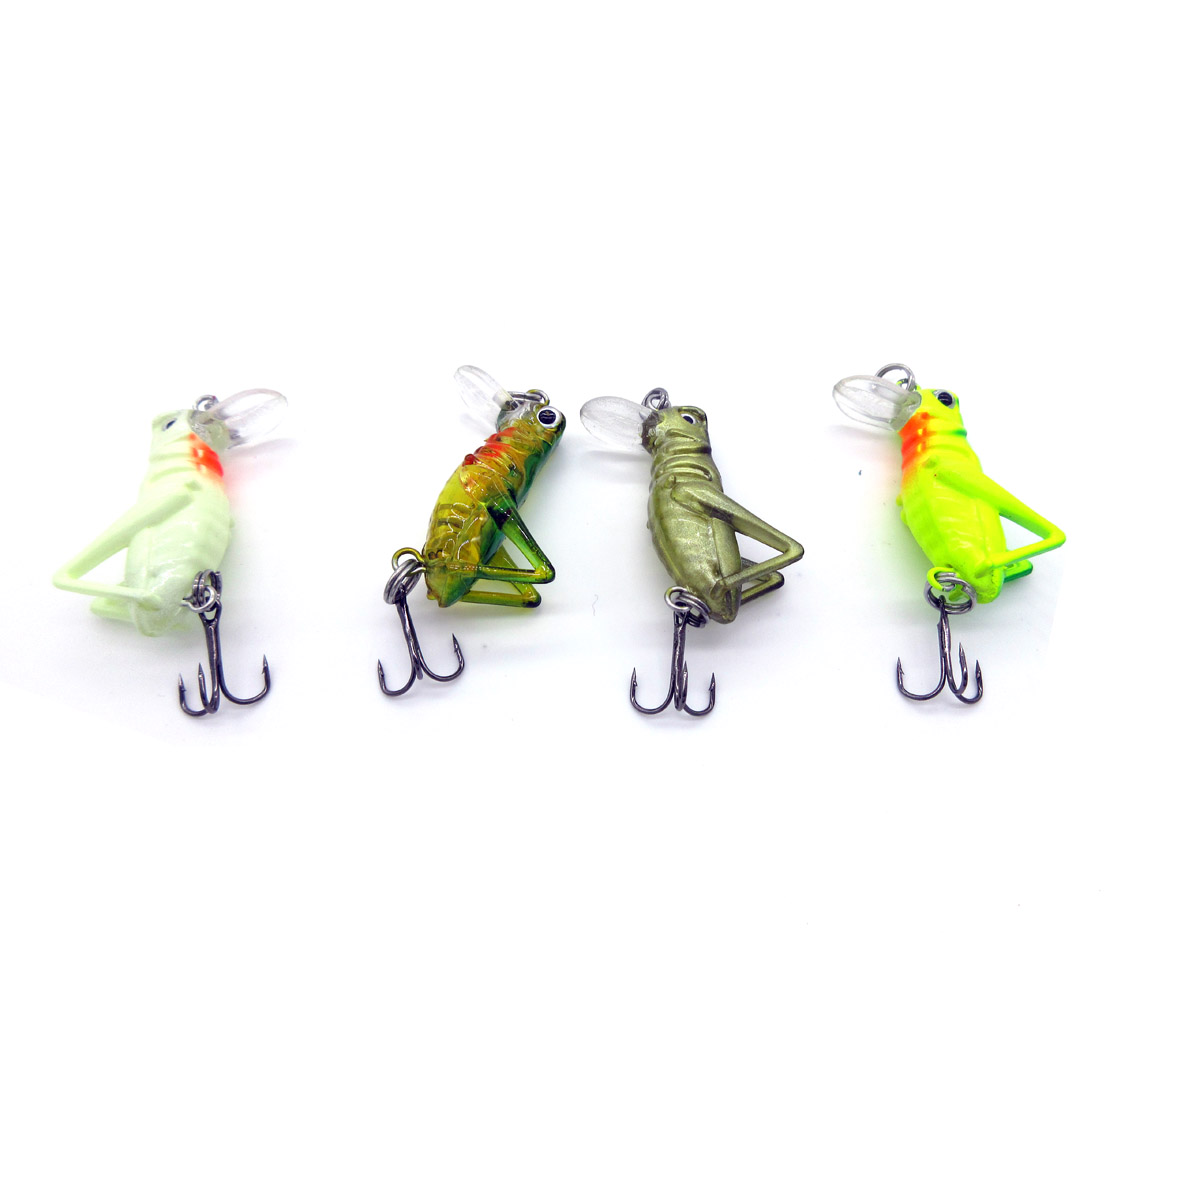 Exclusive discounts for New 1 X 40mm 3g Grasshopper Insect Fishing Lures  Flying Wobbler Lure Hard Bait